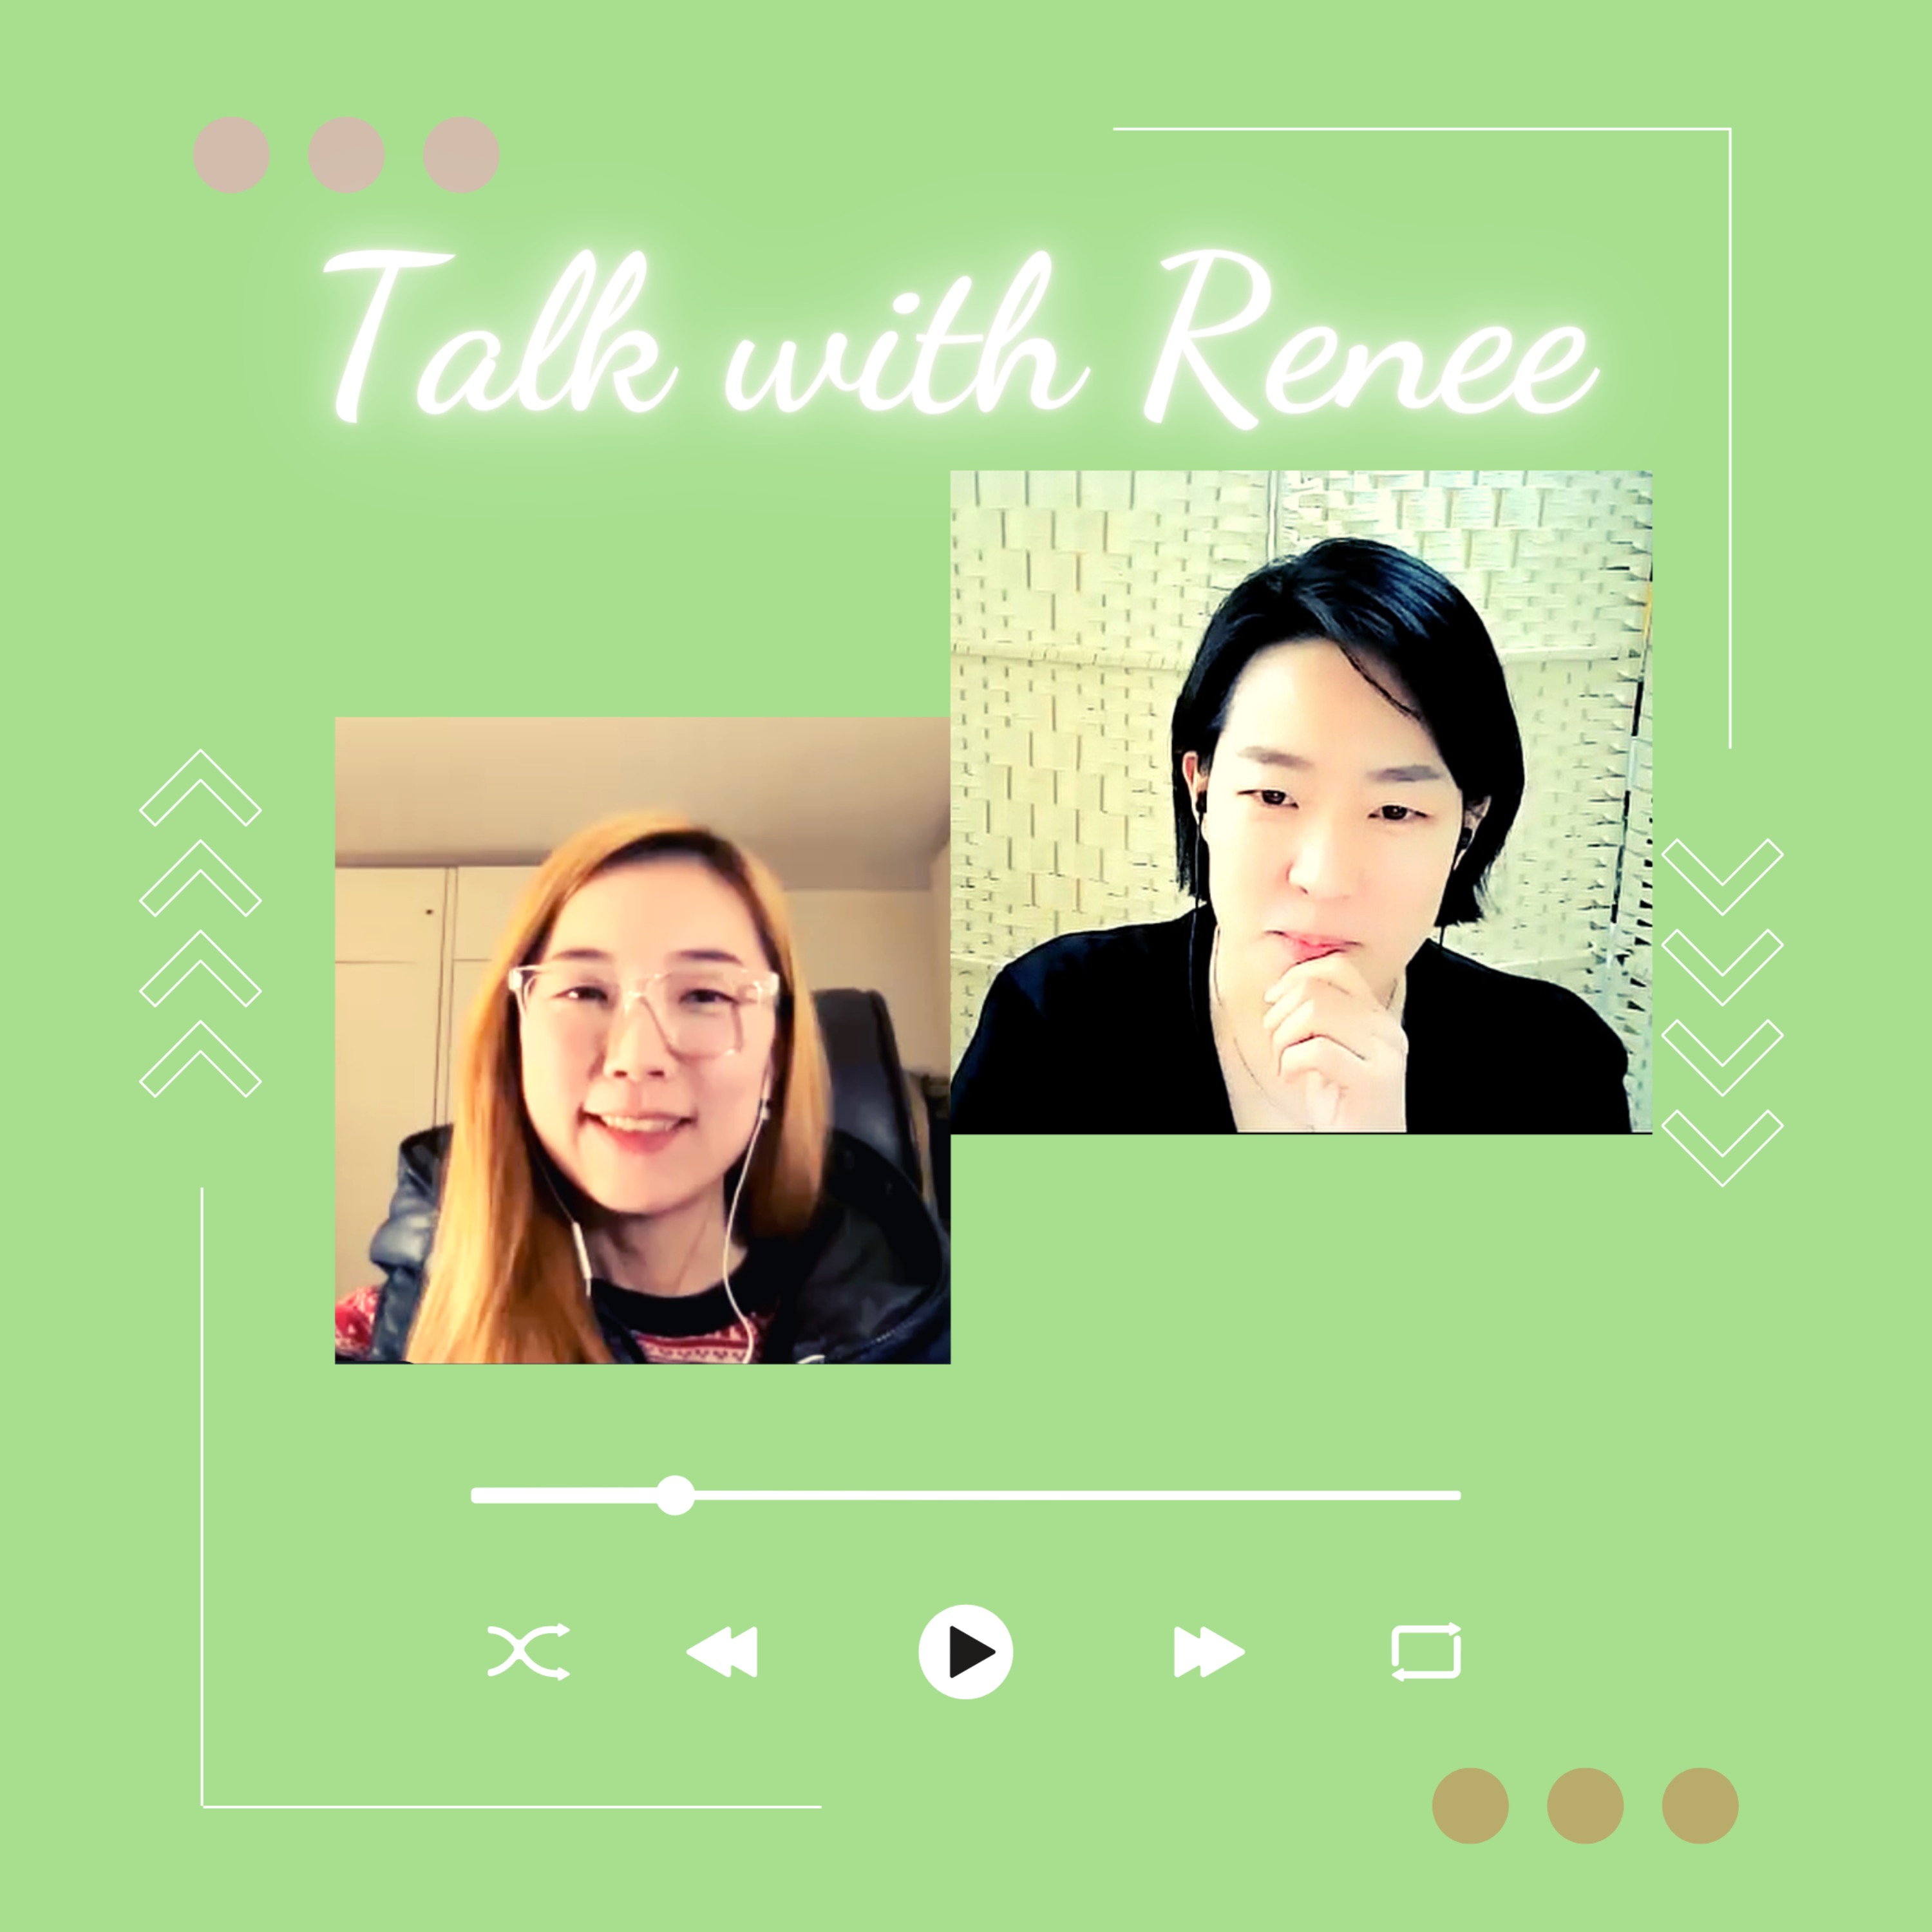 cover art for [Talk with Renee_030] 달리다 vs. 뛰다, similar word pairs, 고독사가 걱정돼요, a woman who’s afraid of dying alone